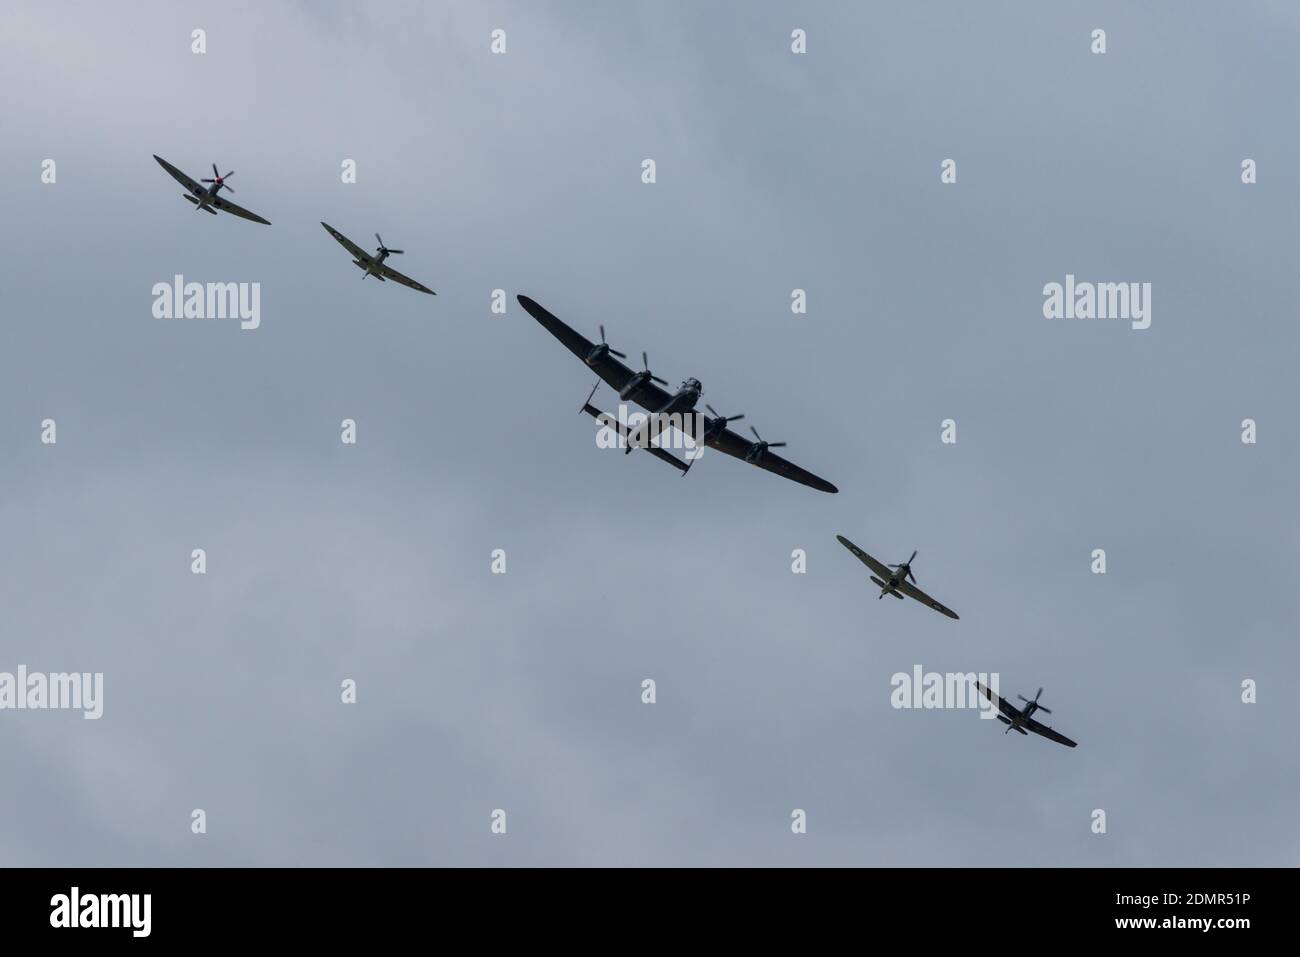 A flight formation of an Avro Lancaster bomber with Supermarine Spitfires and a Hawker Hurricane fighters at the RIAT air-show in England Stock Photo